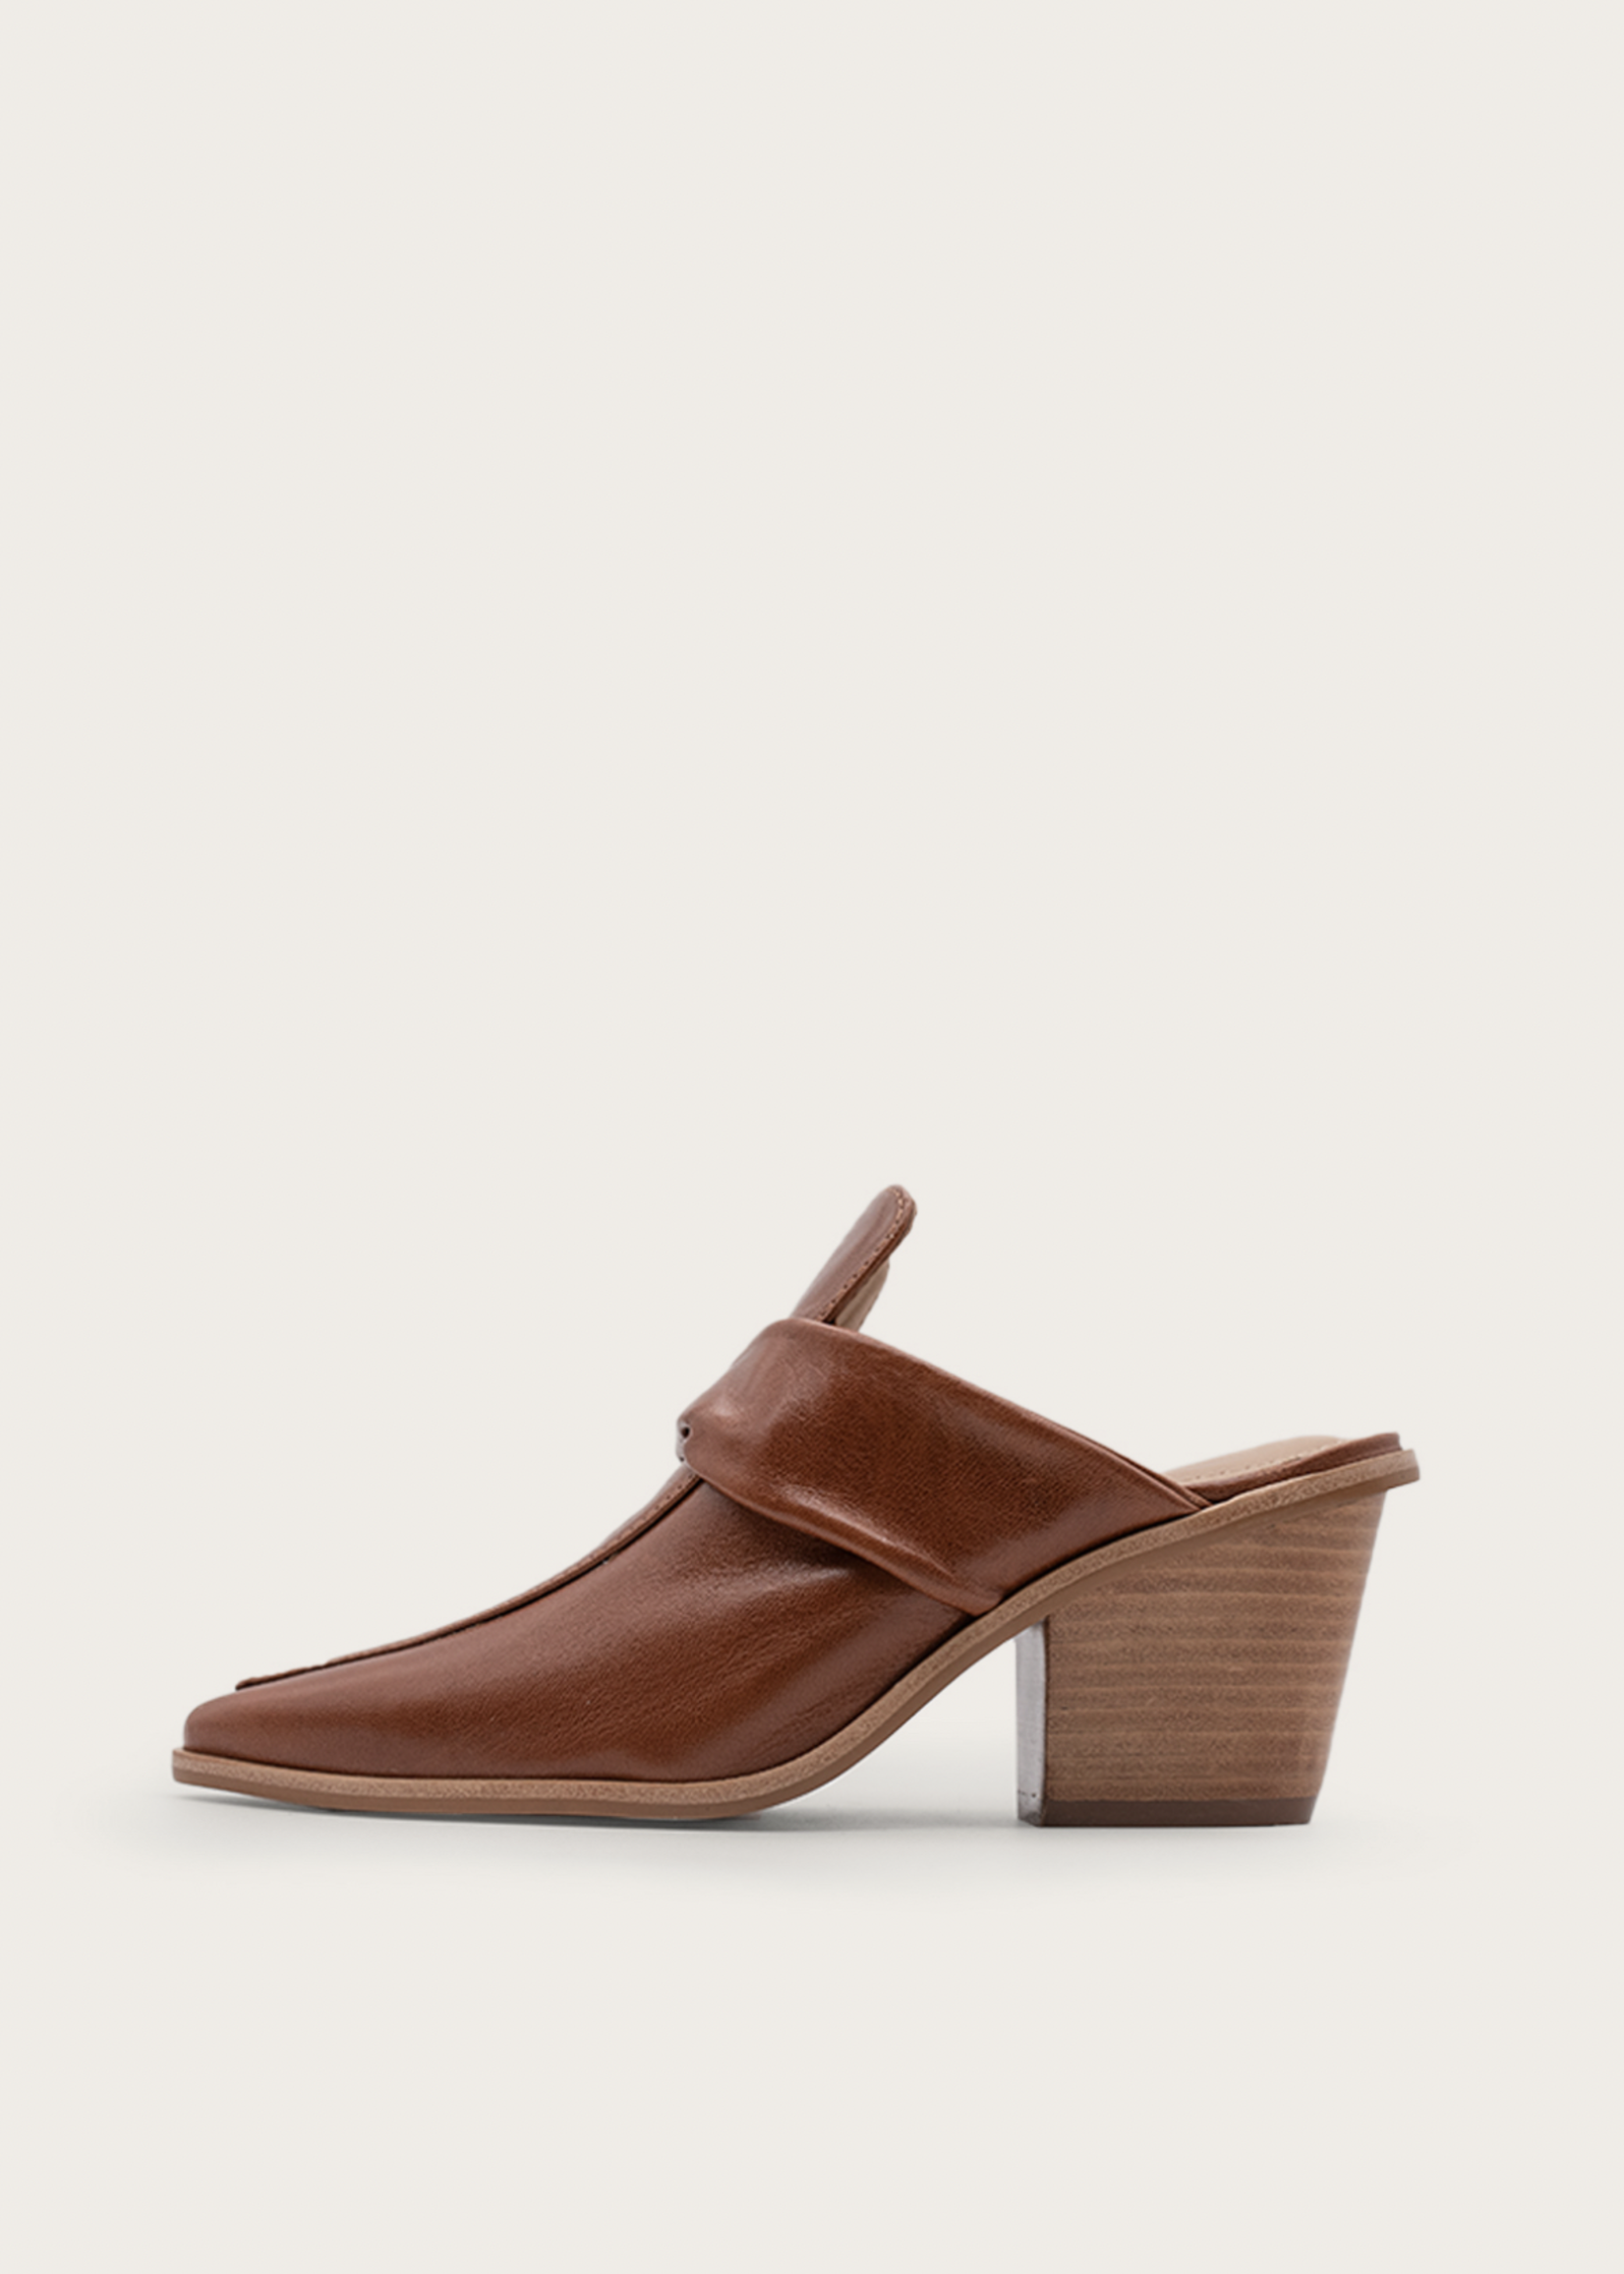 Elitaire Boutique Meridiana Loafer Mule in Toffee